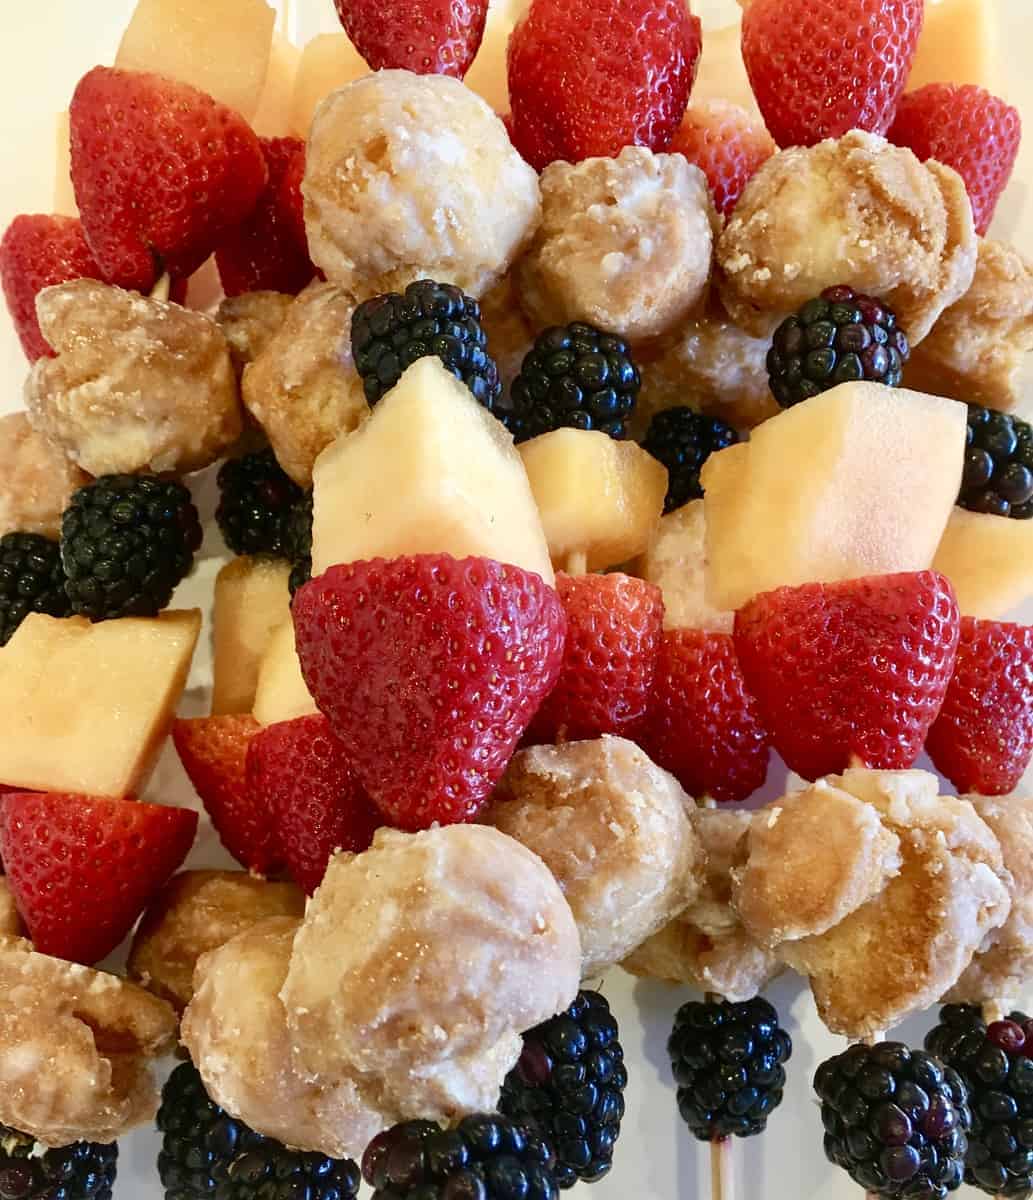 Donut and Fruit Skewers Kabobs are an easy recipe to serve at Baby Showers or Bridal Showers. Great as an after school snack too or kids birthday parties. #donut #fruit #skewer #babyshowerfood #bridalshowerfood #easyrecipe #dessert #appetizer #simpledish #footballfood #afterschoolsnack